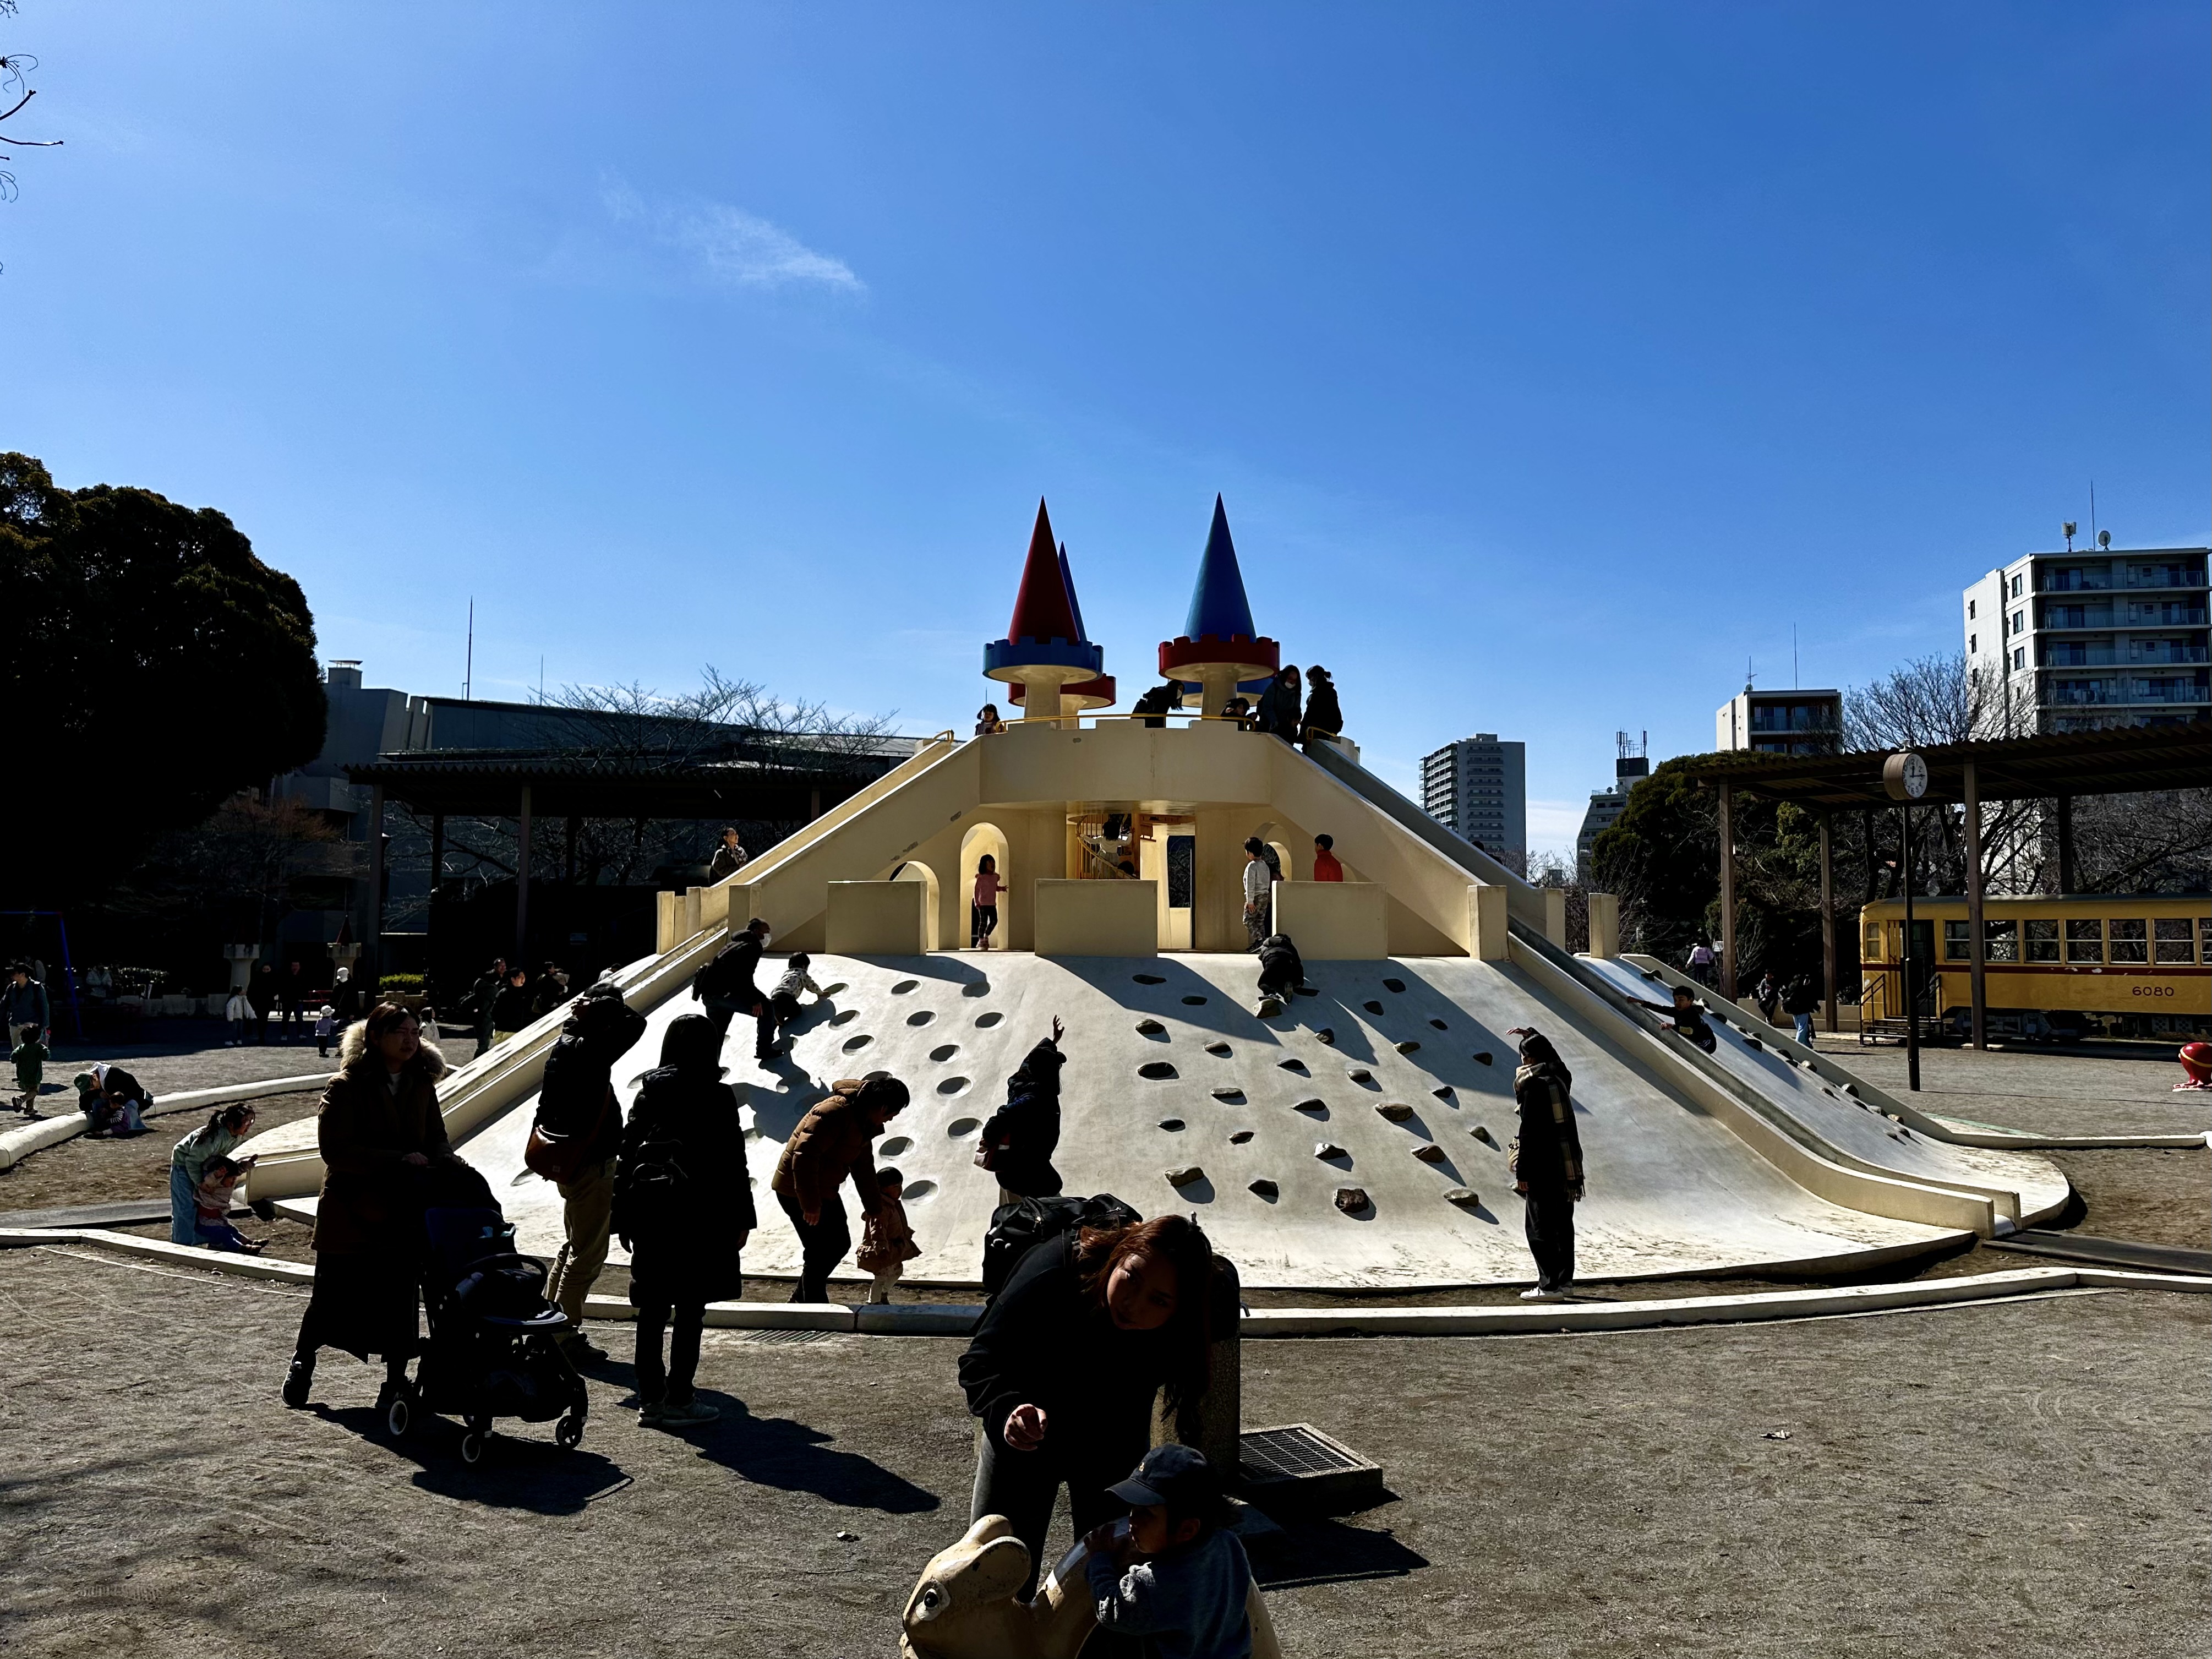 A two story concrete castle play structure in a park in northern Tokyo